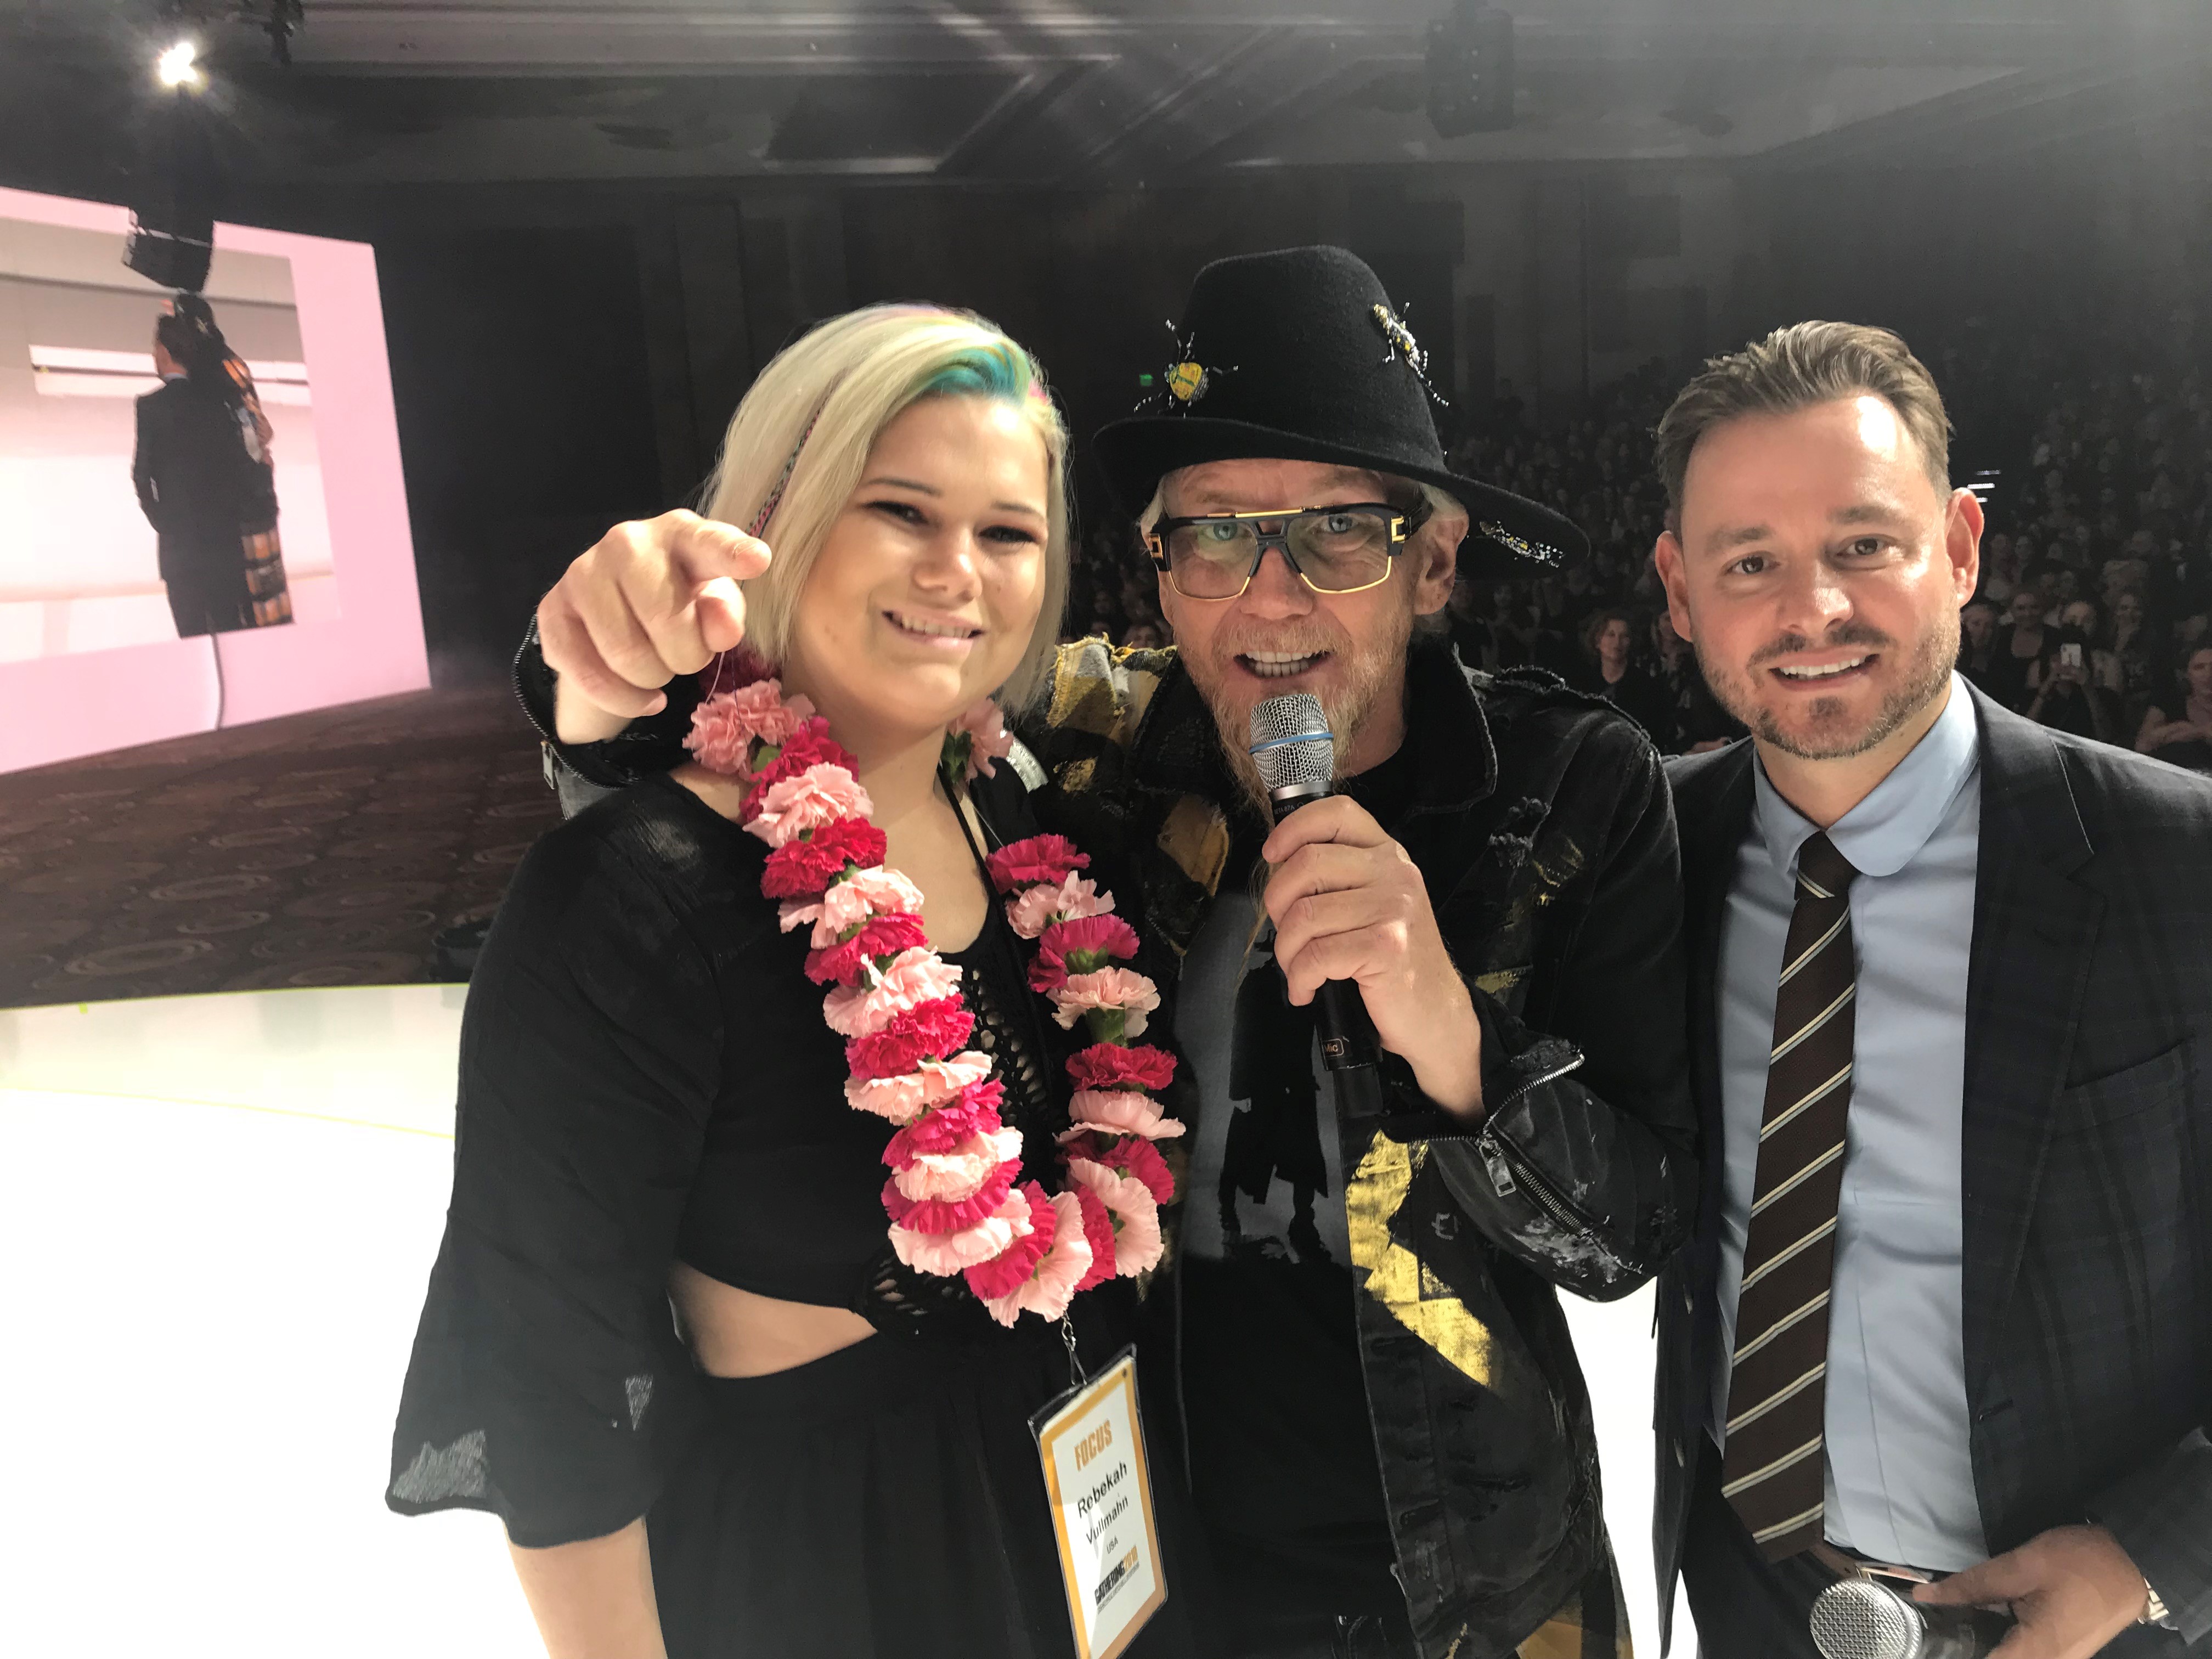 Anderson & Company stylists win big at Paul Mitchell Gathering in Las Vegas